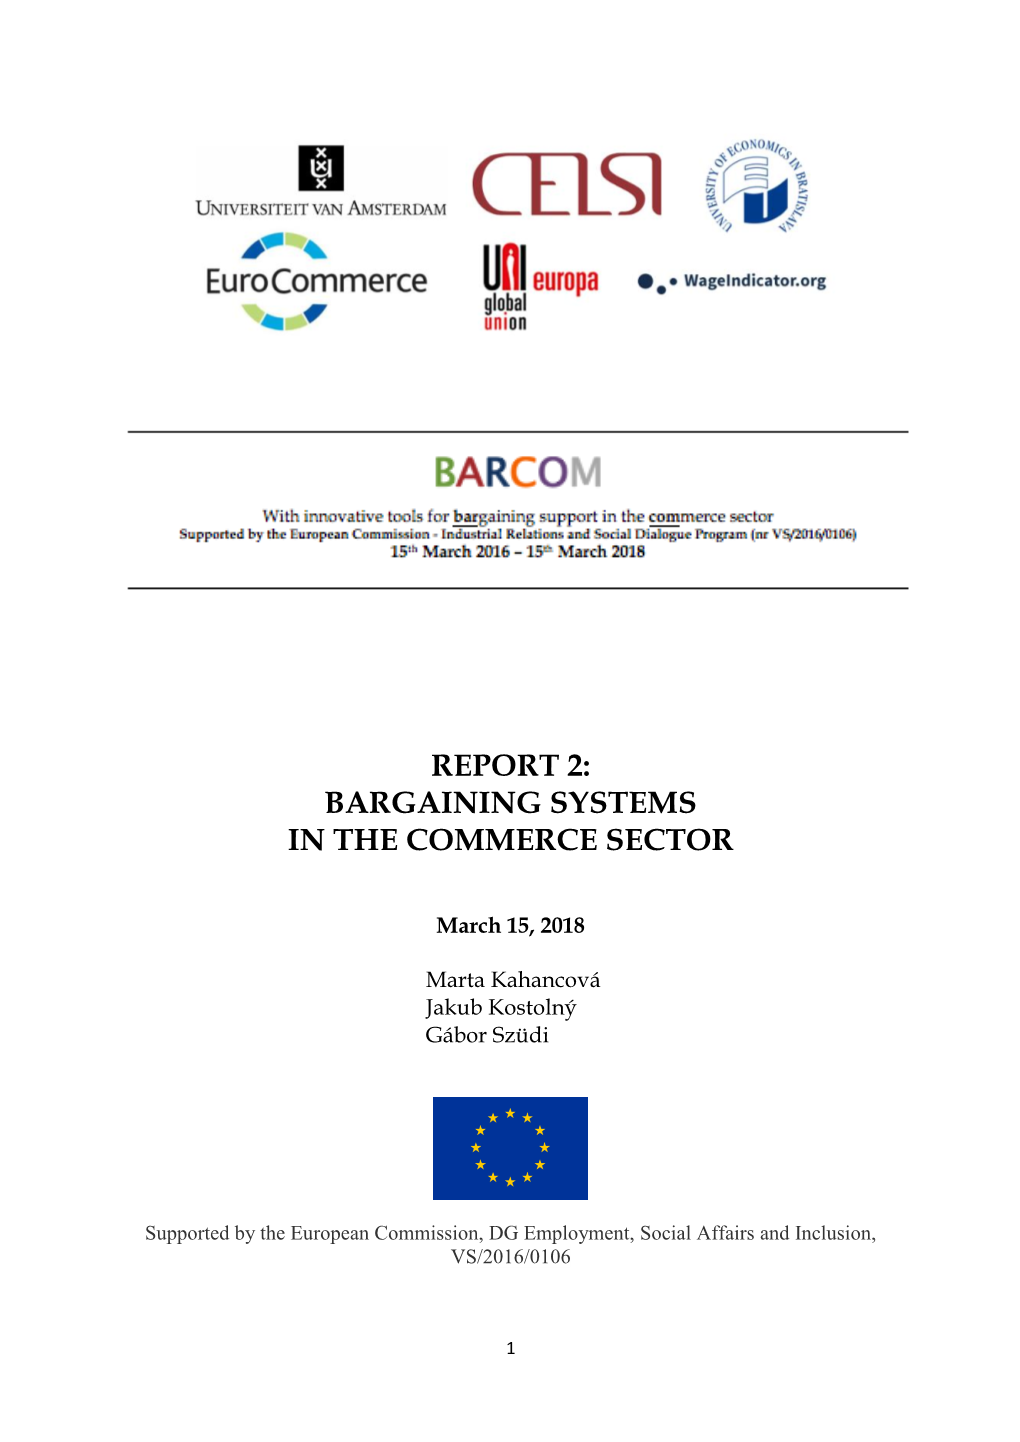 Report 2: Bargaining Systems in the Commerce Sector